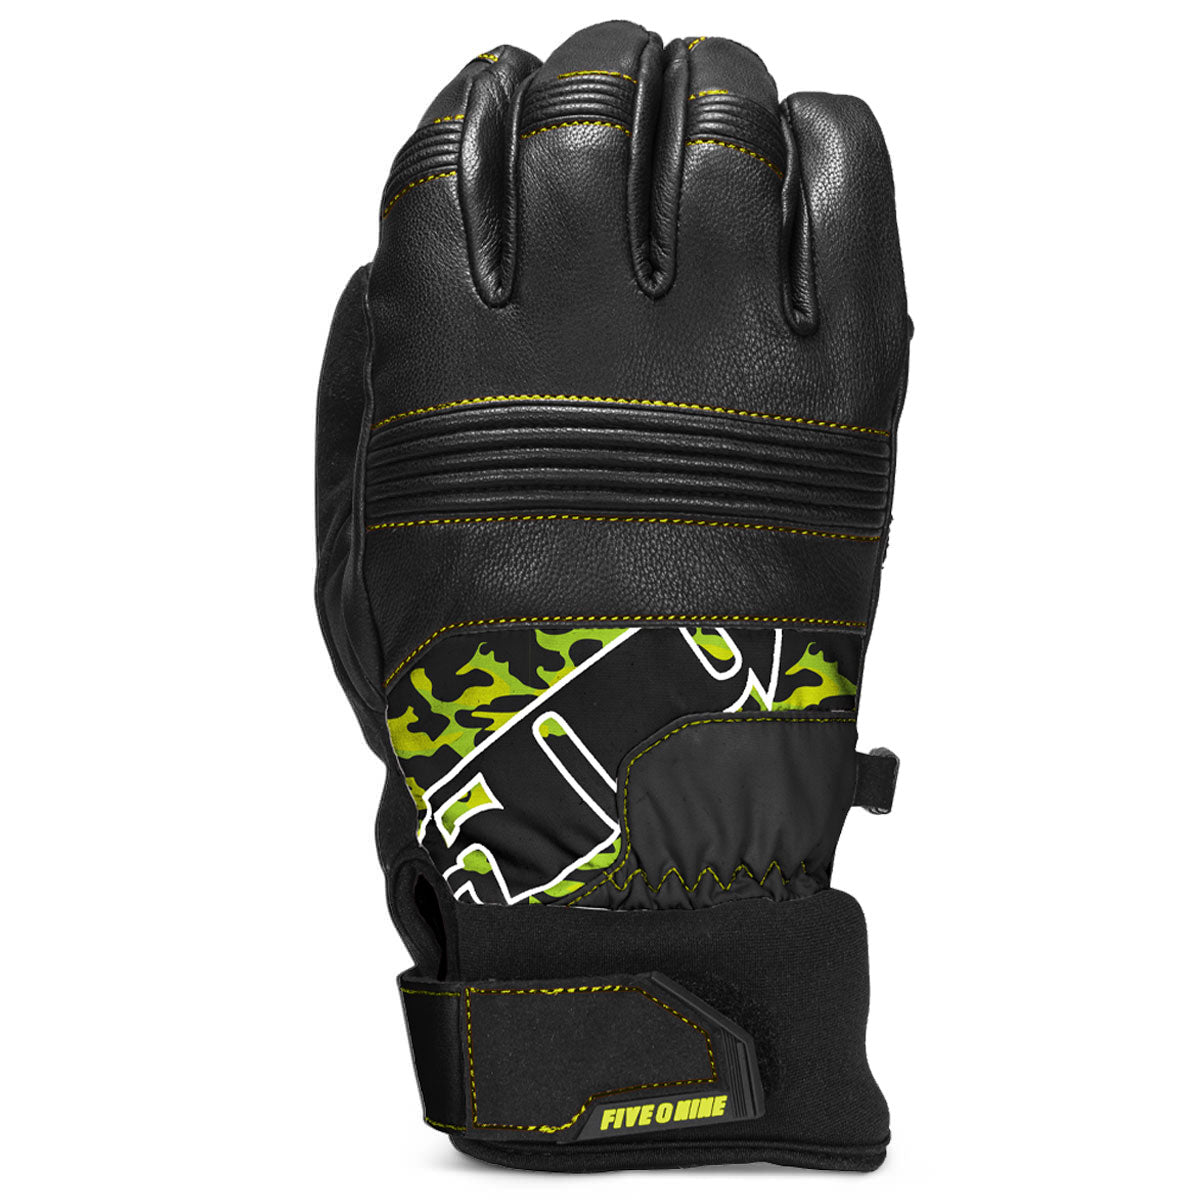 Dirty Rigger Comfort Fit Rigger Glove (Size S) - Vocas Sales & Services is  official Dirty Rigger dealer!